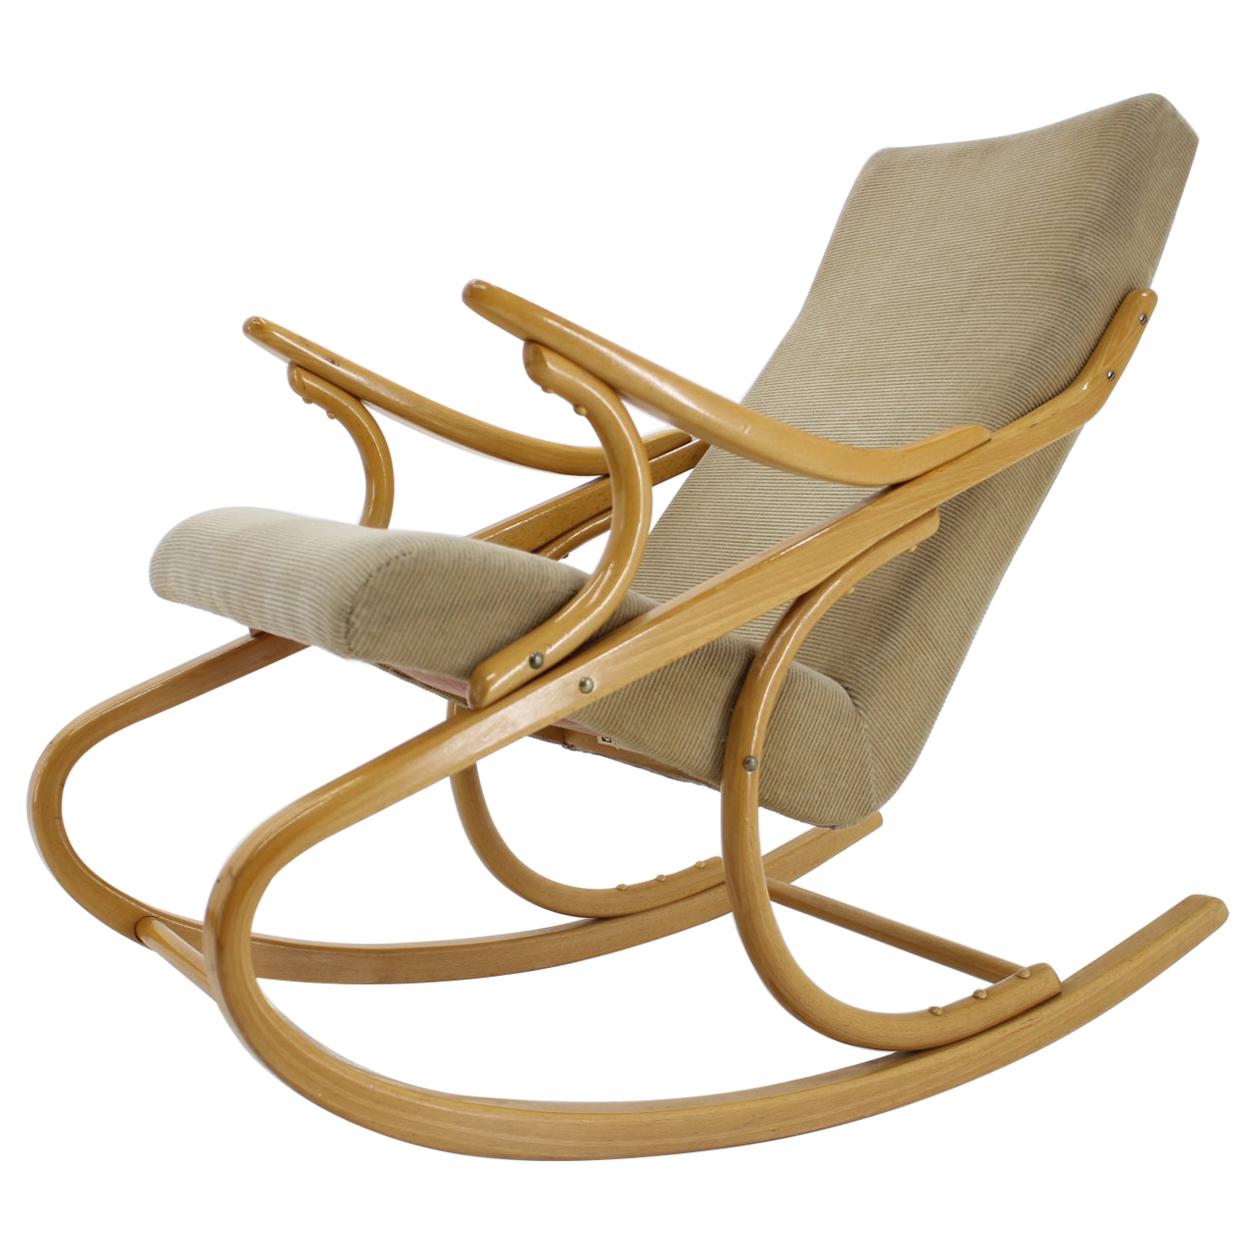 Iconic Midcentury Design Rocking Chair / Expo, 1958 For Sale